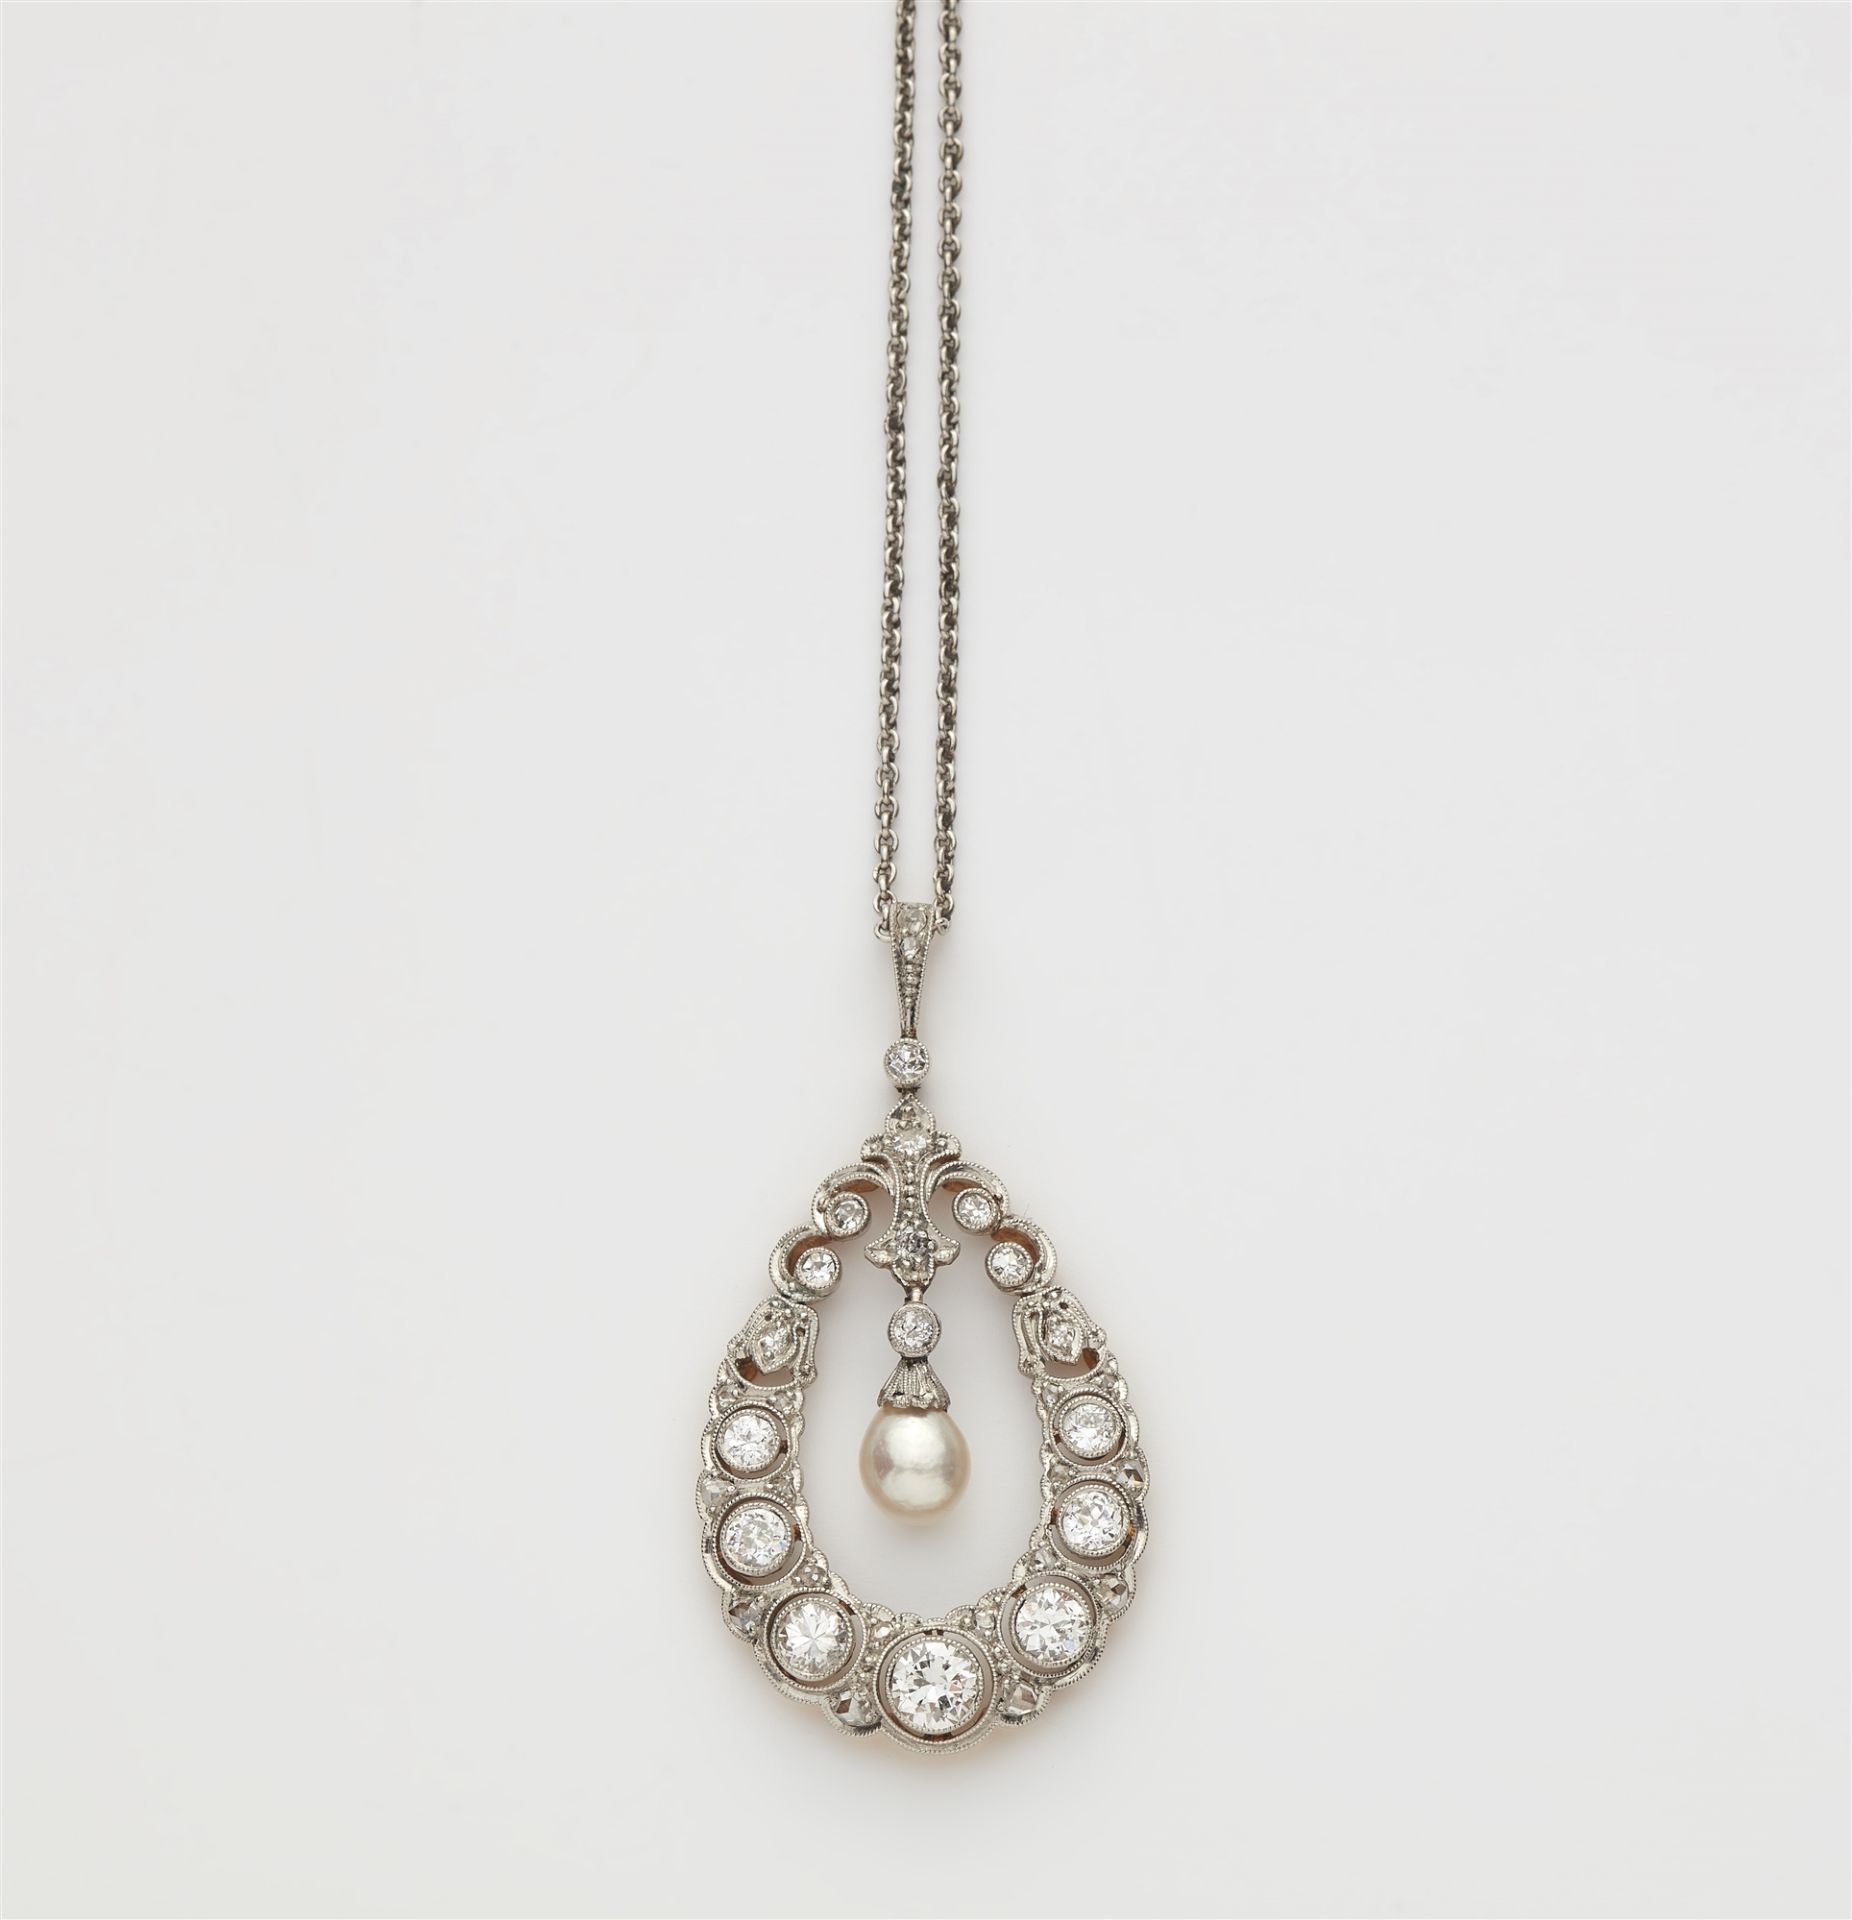 A platinum 14k gold diamond and natural pearl drop Belle Epoque pendant with a platinum chain.